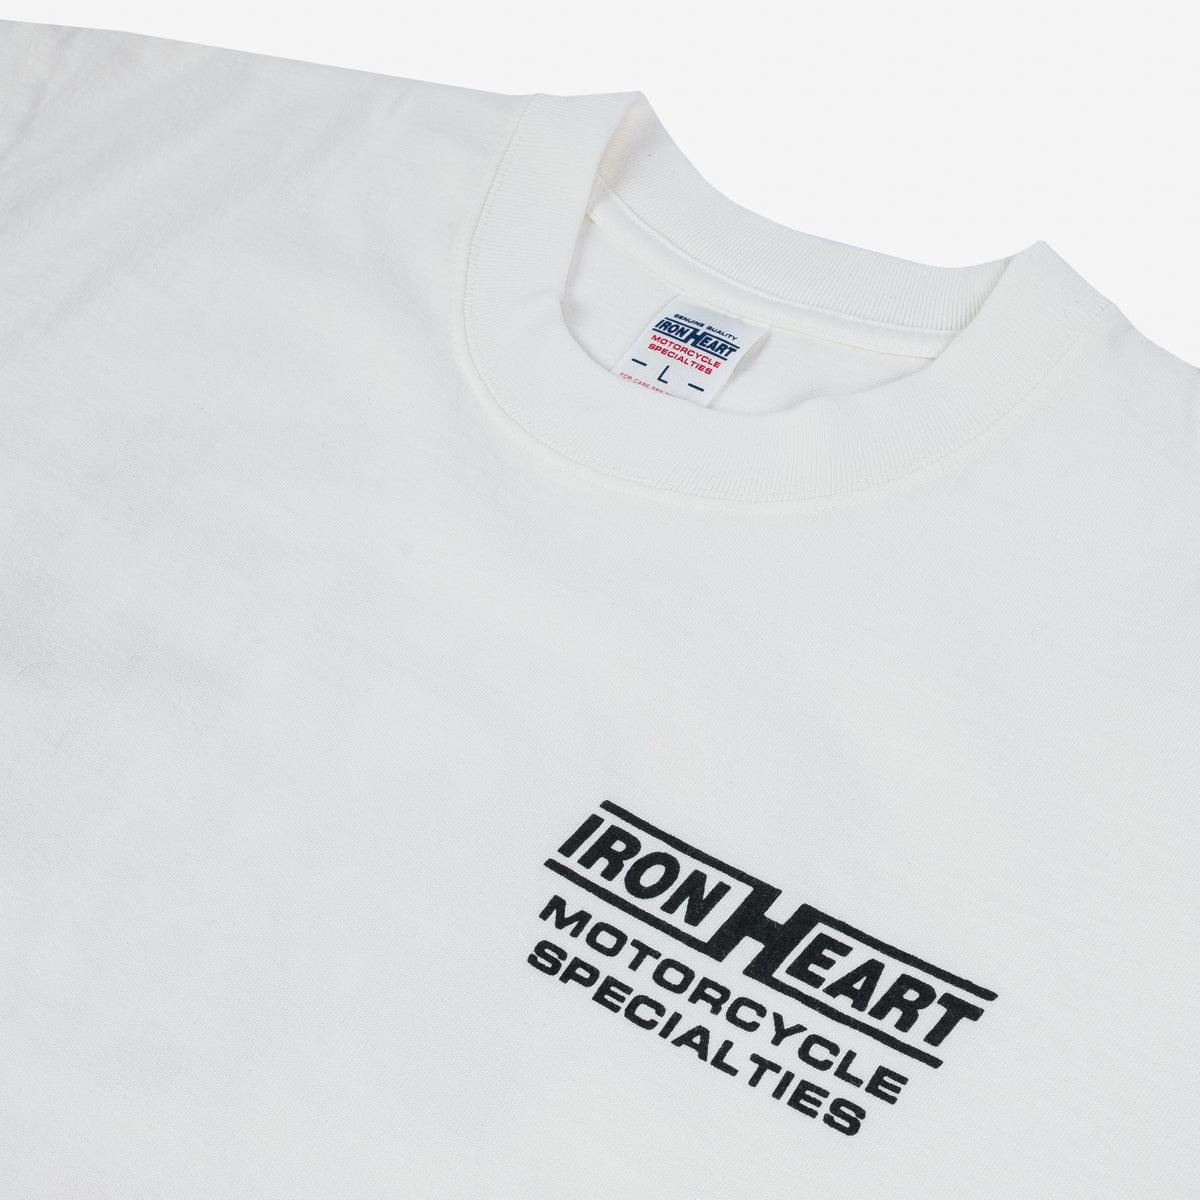 Image showing the IHPT-2302-WHT- 7.5oz Printed Loopwheel Crew Neck T-Shirt - White which is a T-Shirts described by the following info Iron Heart, Released, T-Shirts, Tops and sold on the IRON HEART GERMANY online store